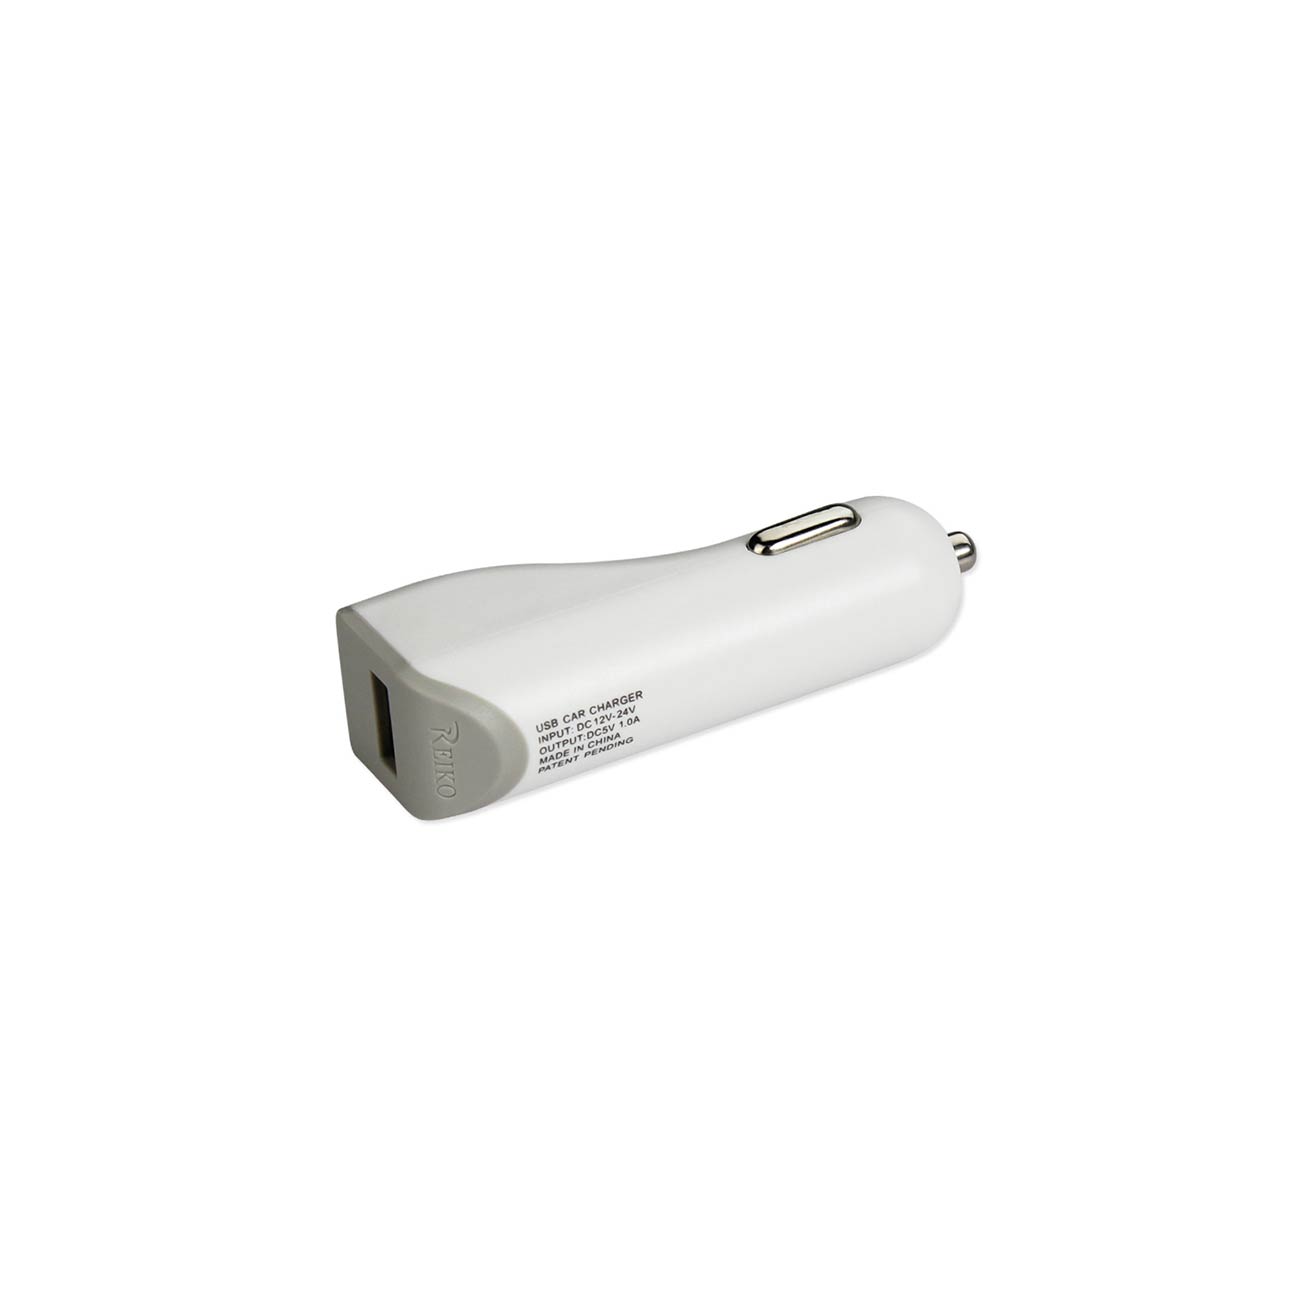 Car Charger Micro USB With USB Data Cable White Color